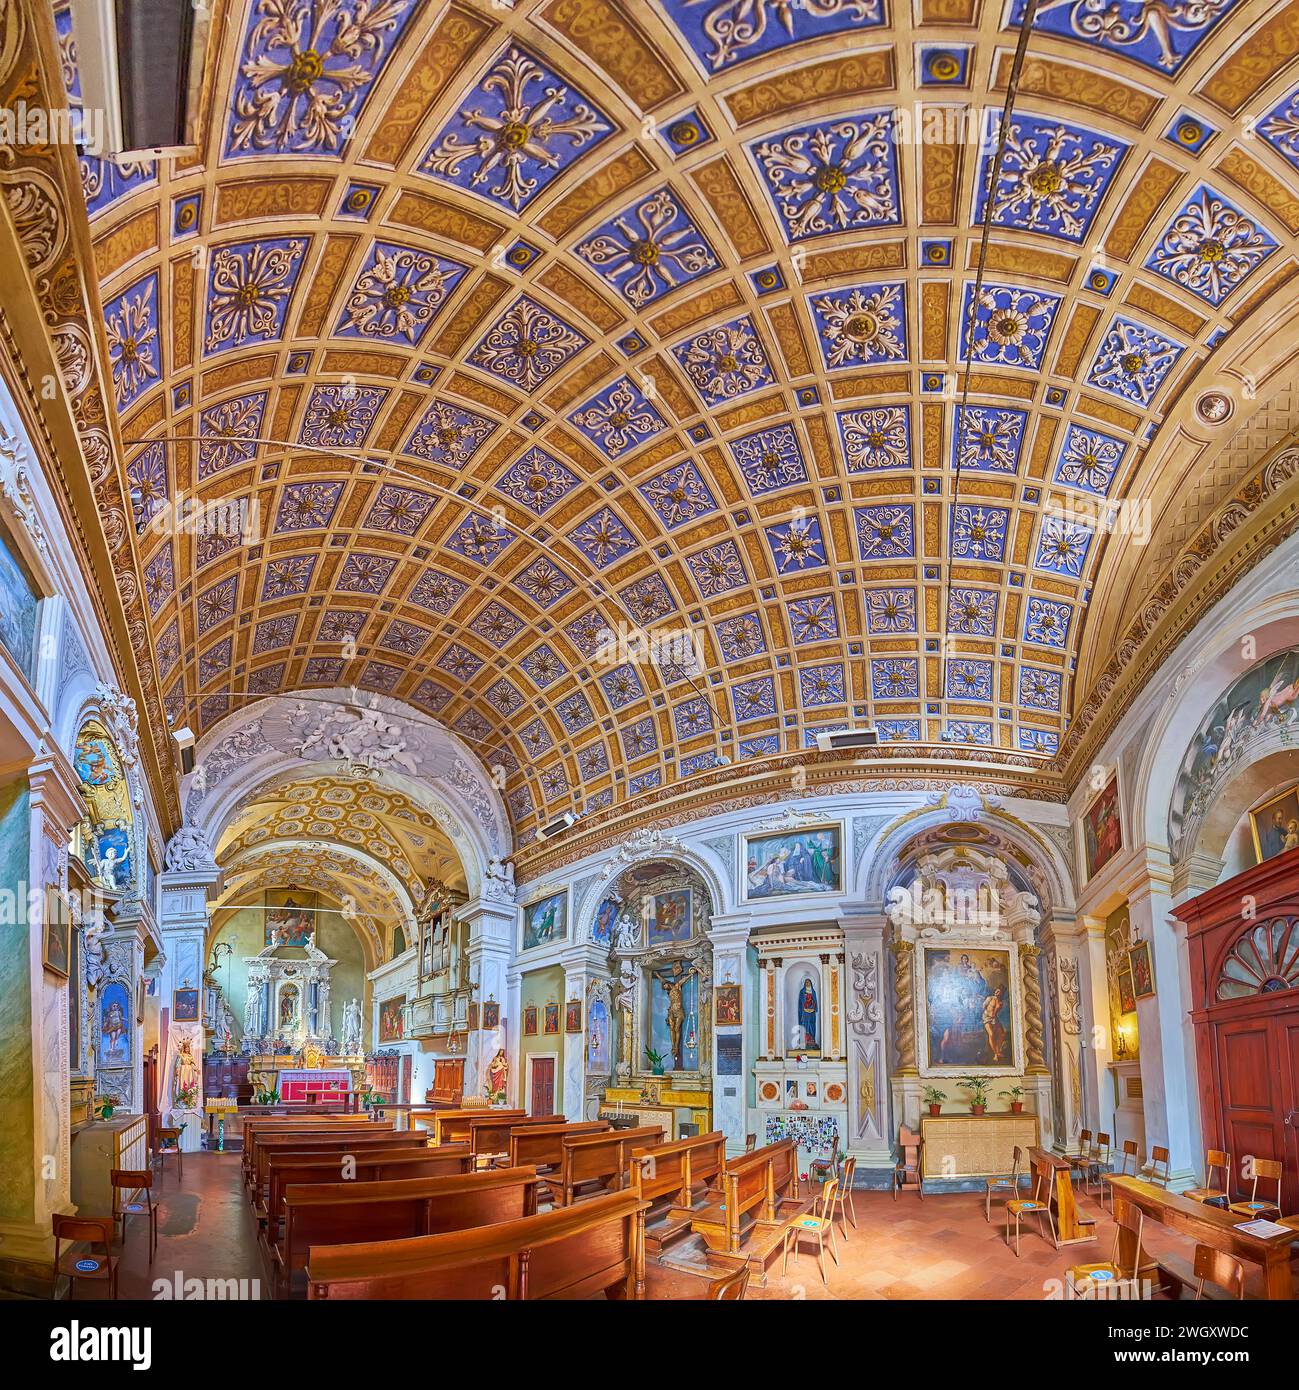 PIACENZA, ITALY - APRIL 6, 2022: Panoramic view of San Rocco Church interior, decorated with paintings, frescoes, stucco decors, sculptures, Piacenza, Stock Photo